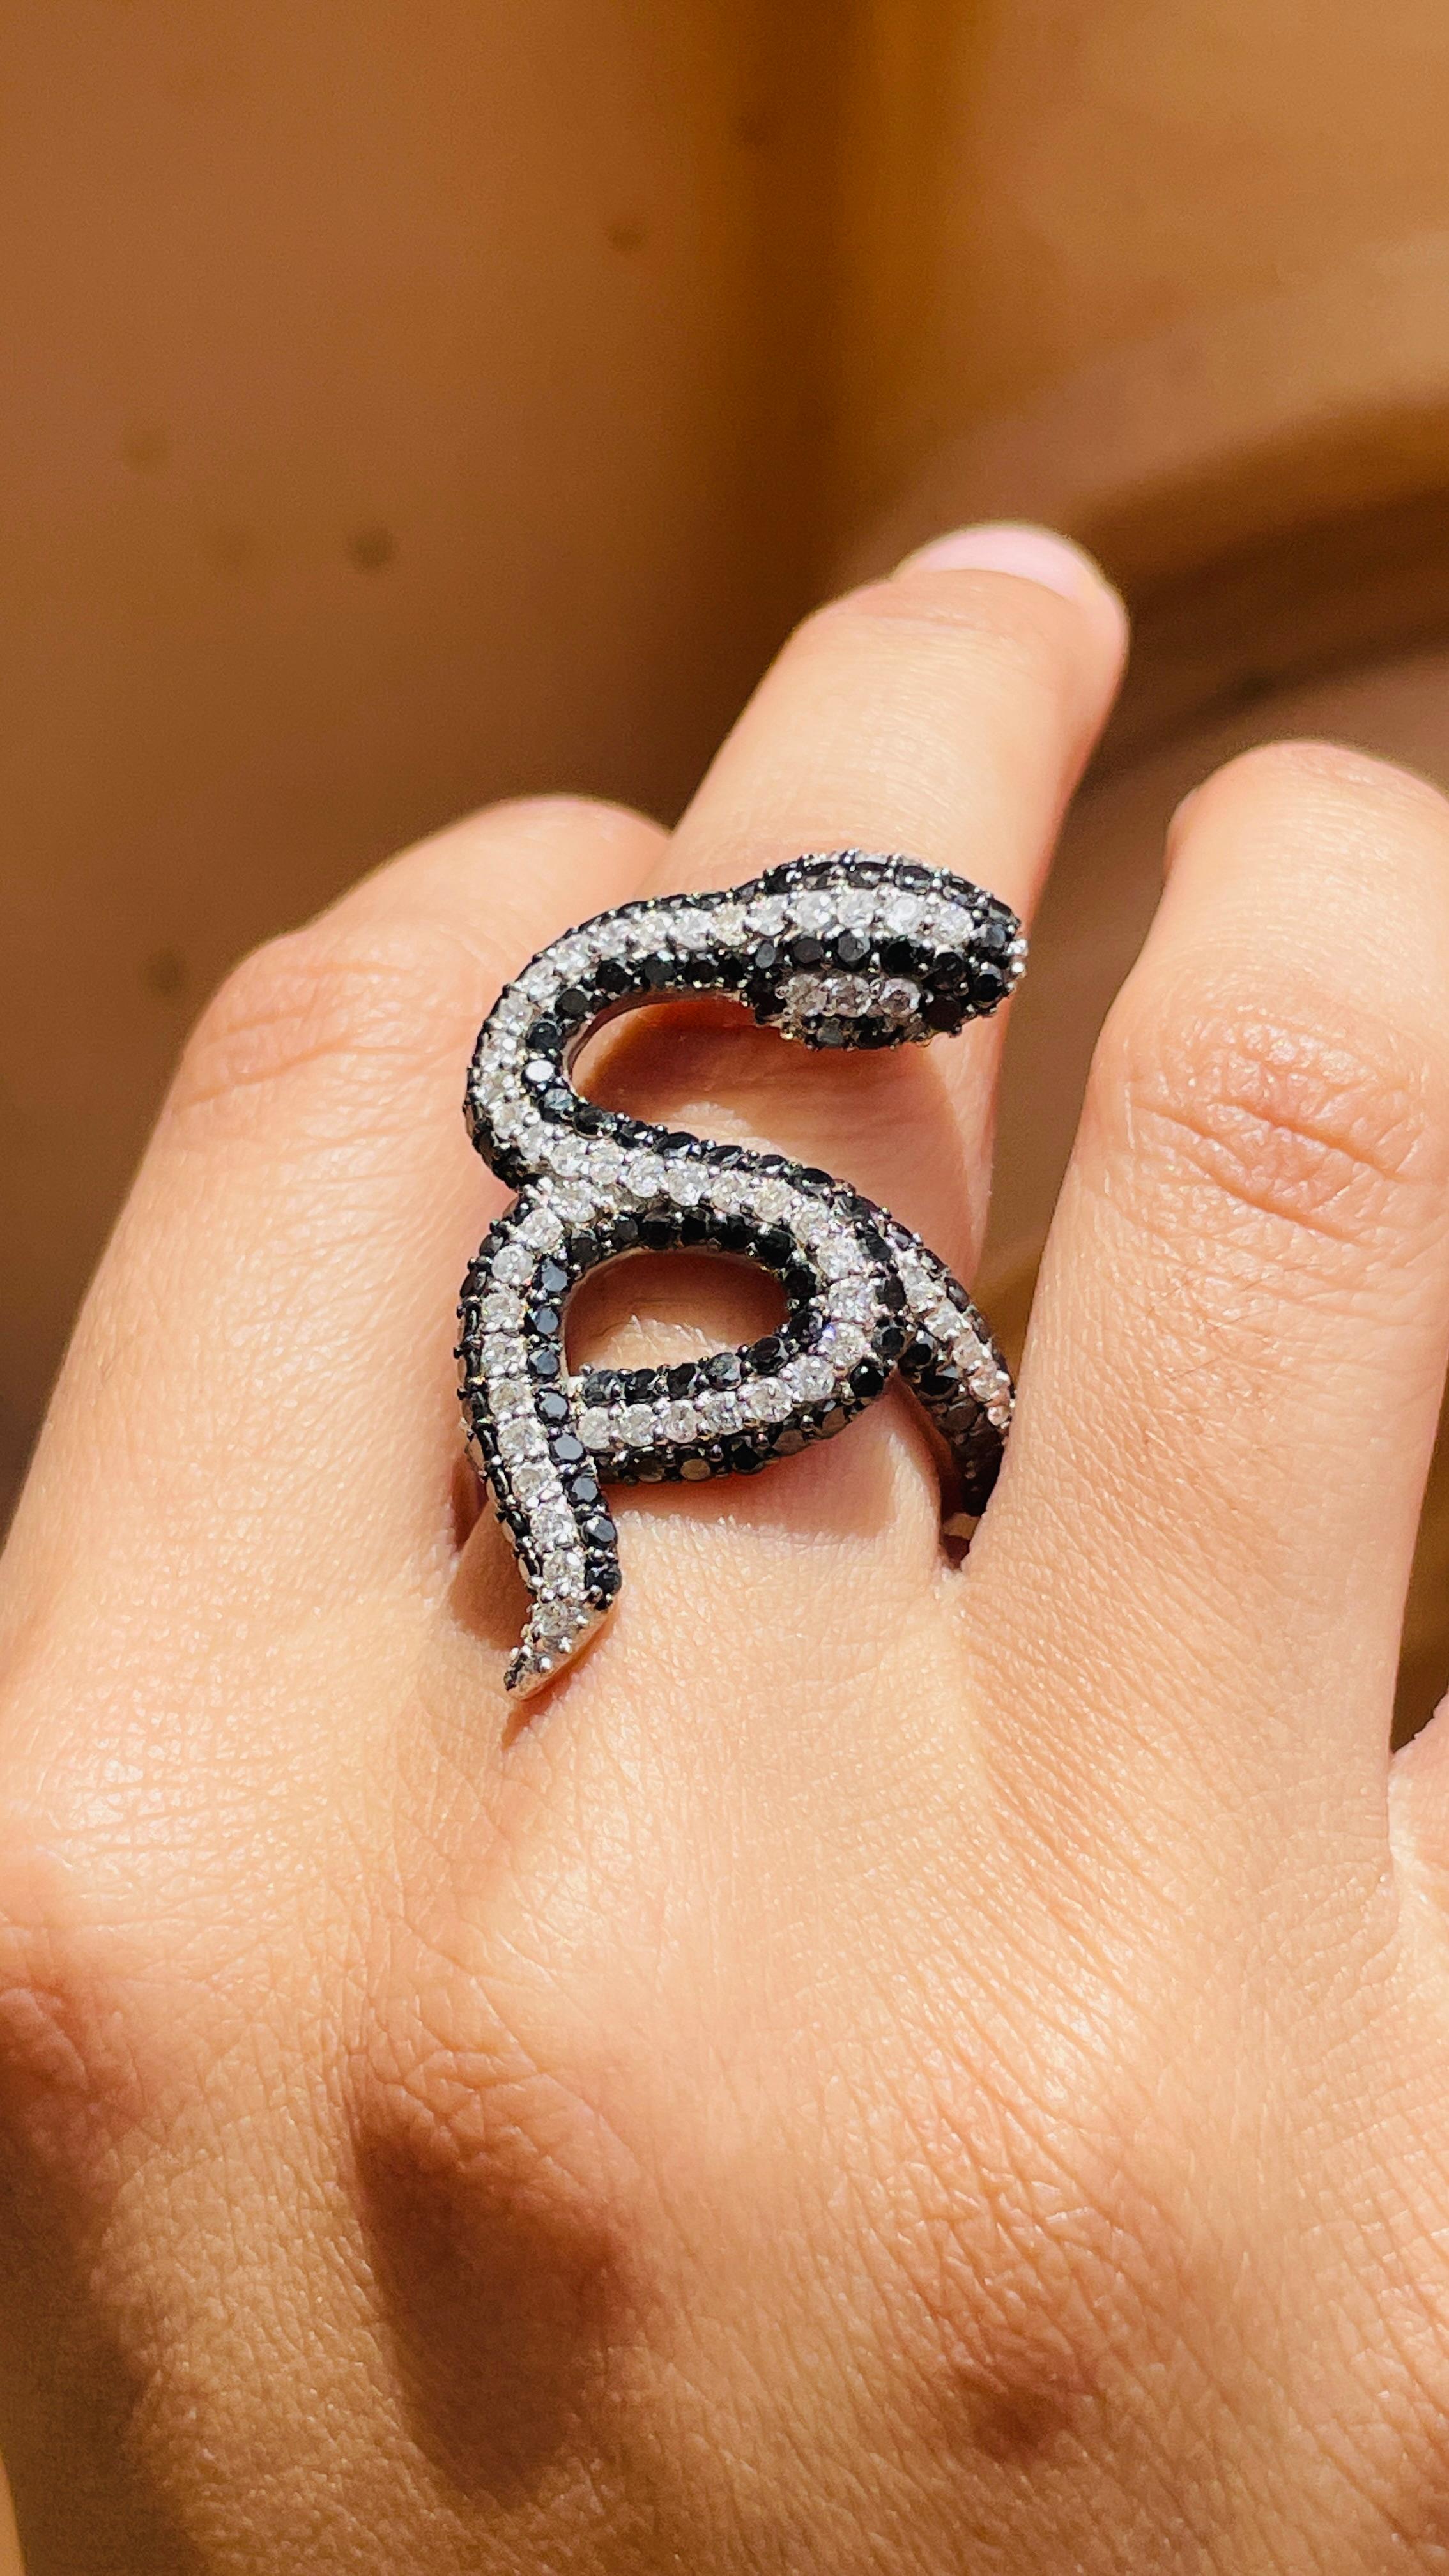 For Sale:  Statement Genuine Diamond Snake Ring in 18kt Solid White Gold  3